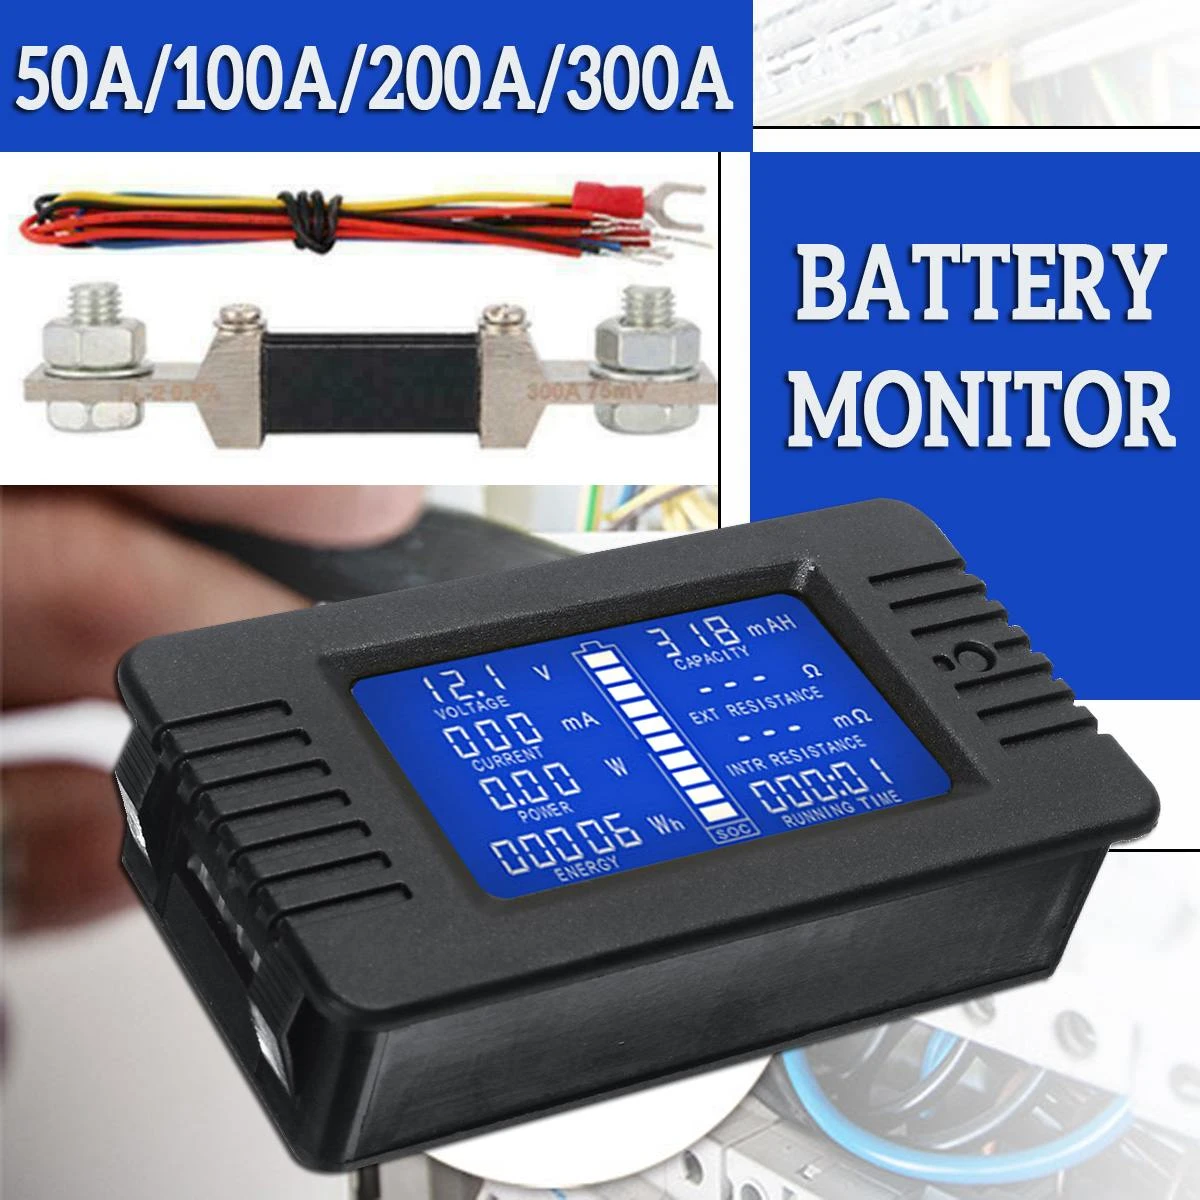 DC Multifunction Battery Monitor Meter 50A/200A/300A LCD Display Digital Current Multimeter Voltmeter Ammeter for Cars RV Solar